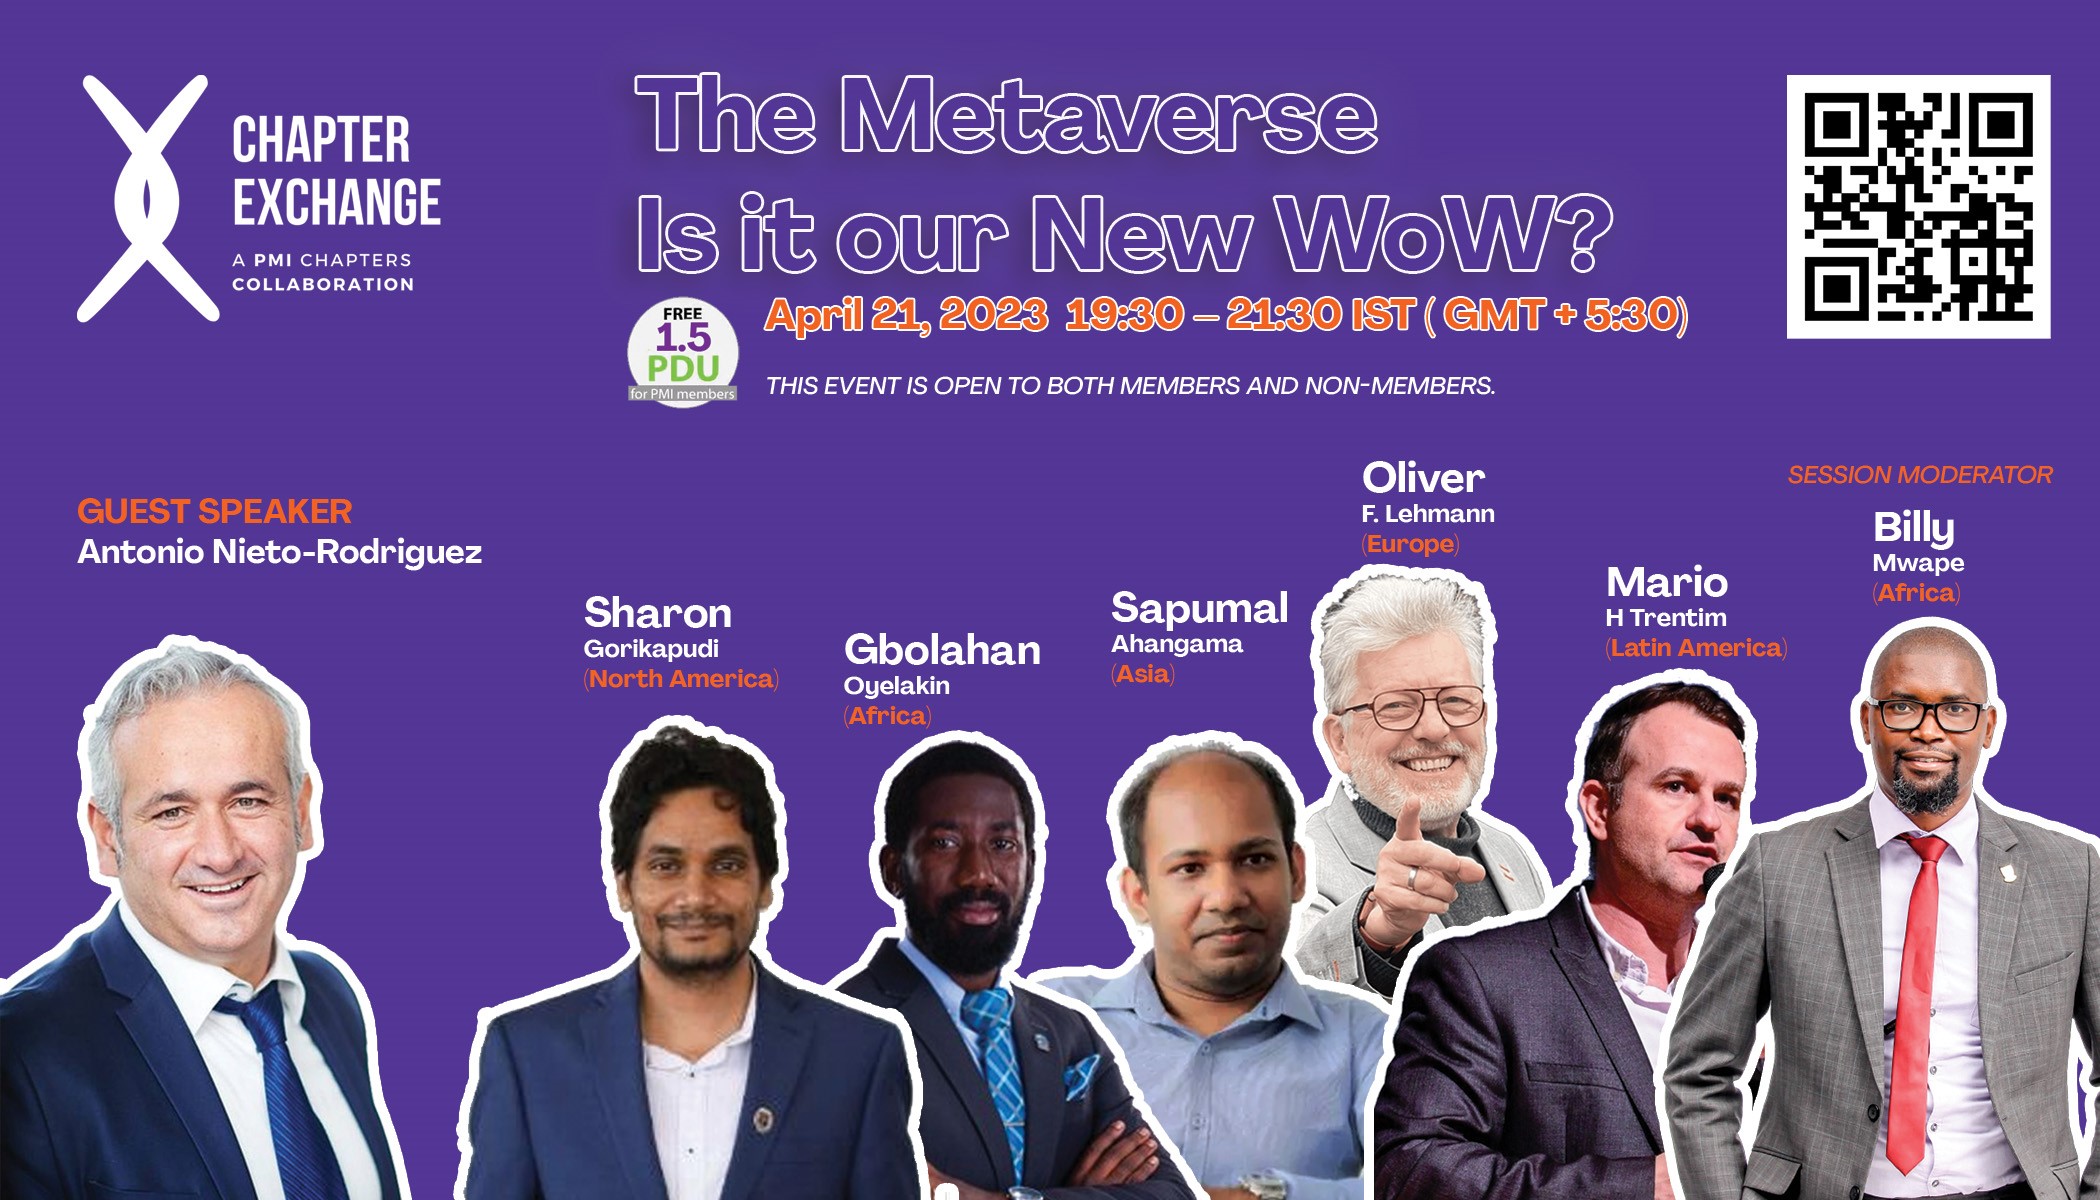 PMI Chapter Xchange | Metaverse - Is it our New WoW ( World of Work)